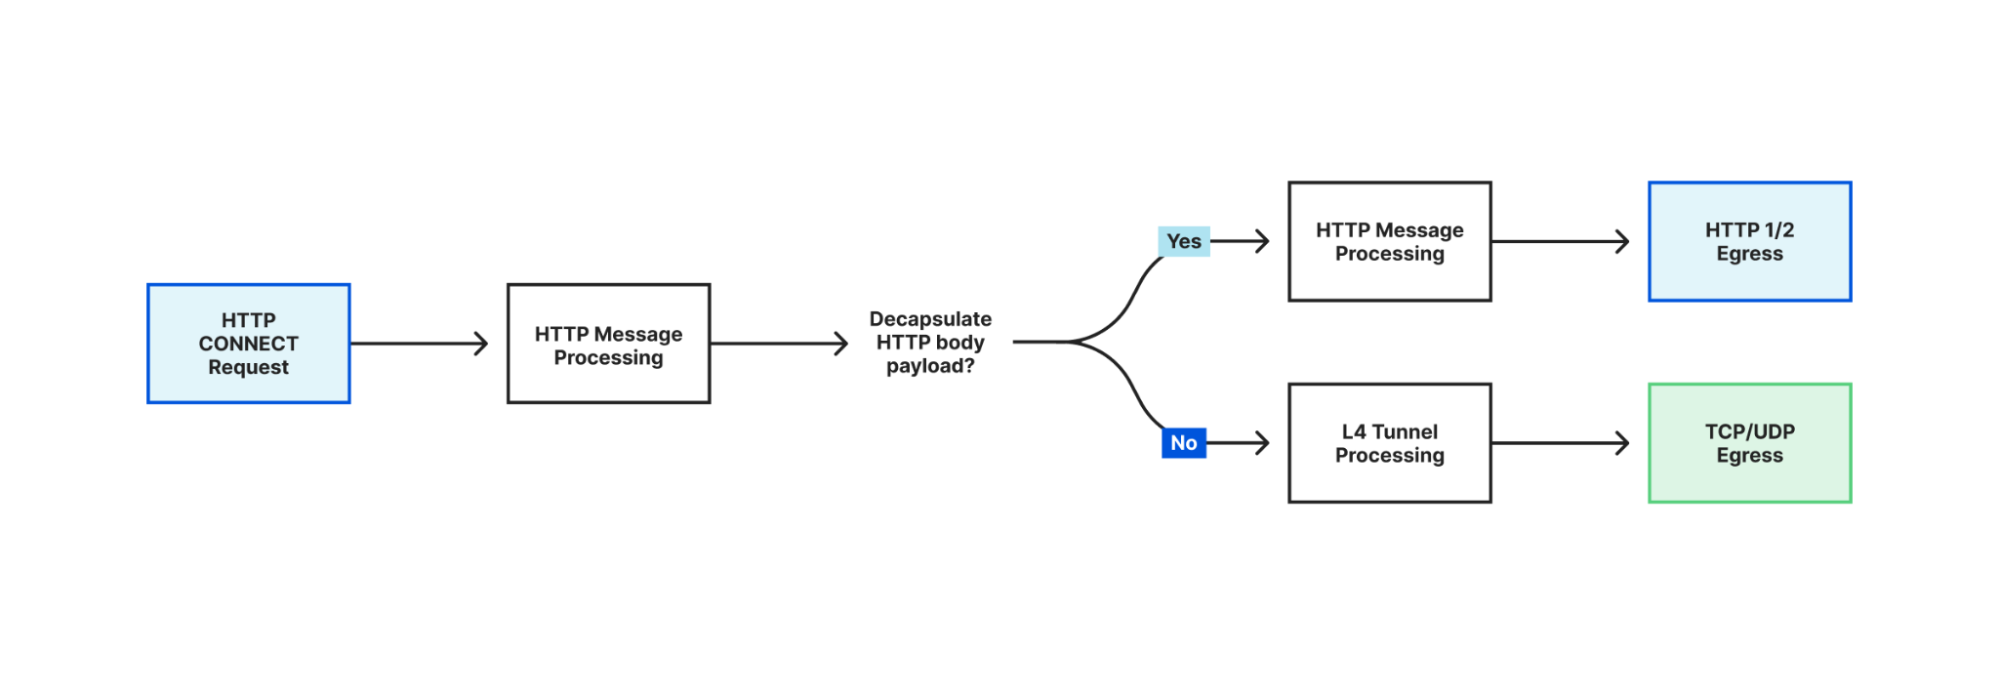 Recursive processing of HTTP CONNECT body payload in HTTP pipeline